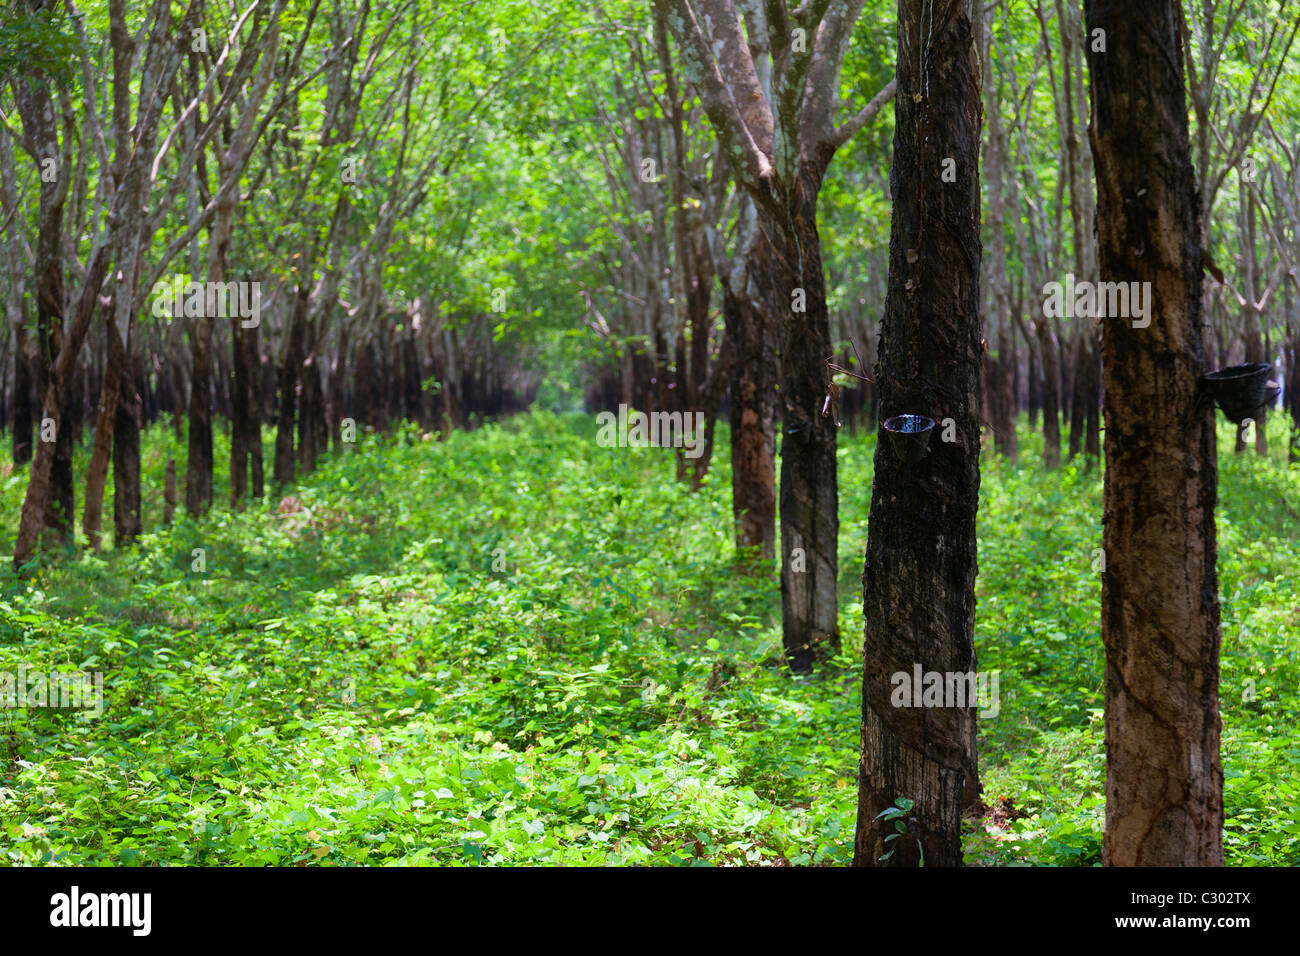 Rows of rubber trees at Chup rubber plantation- Tbong Khmum Province, Cambodia Stock Photo